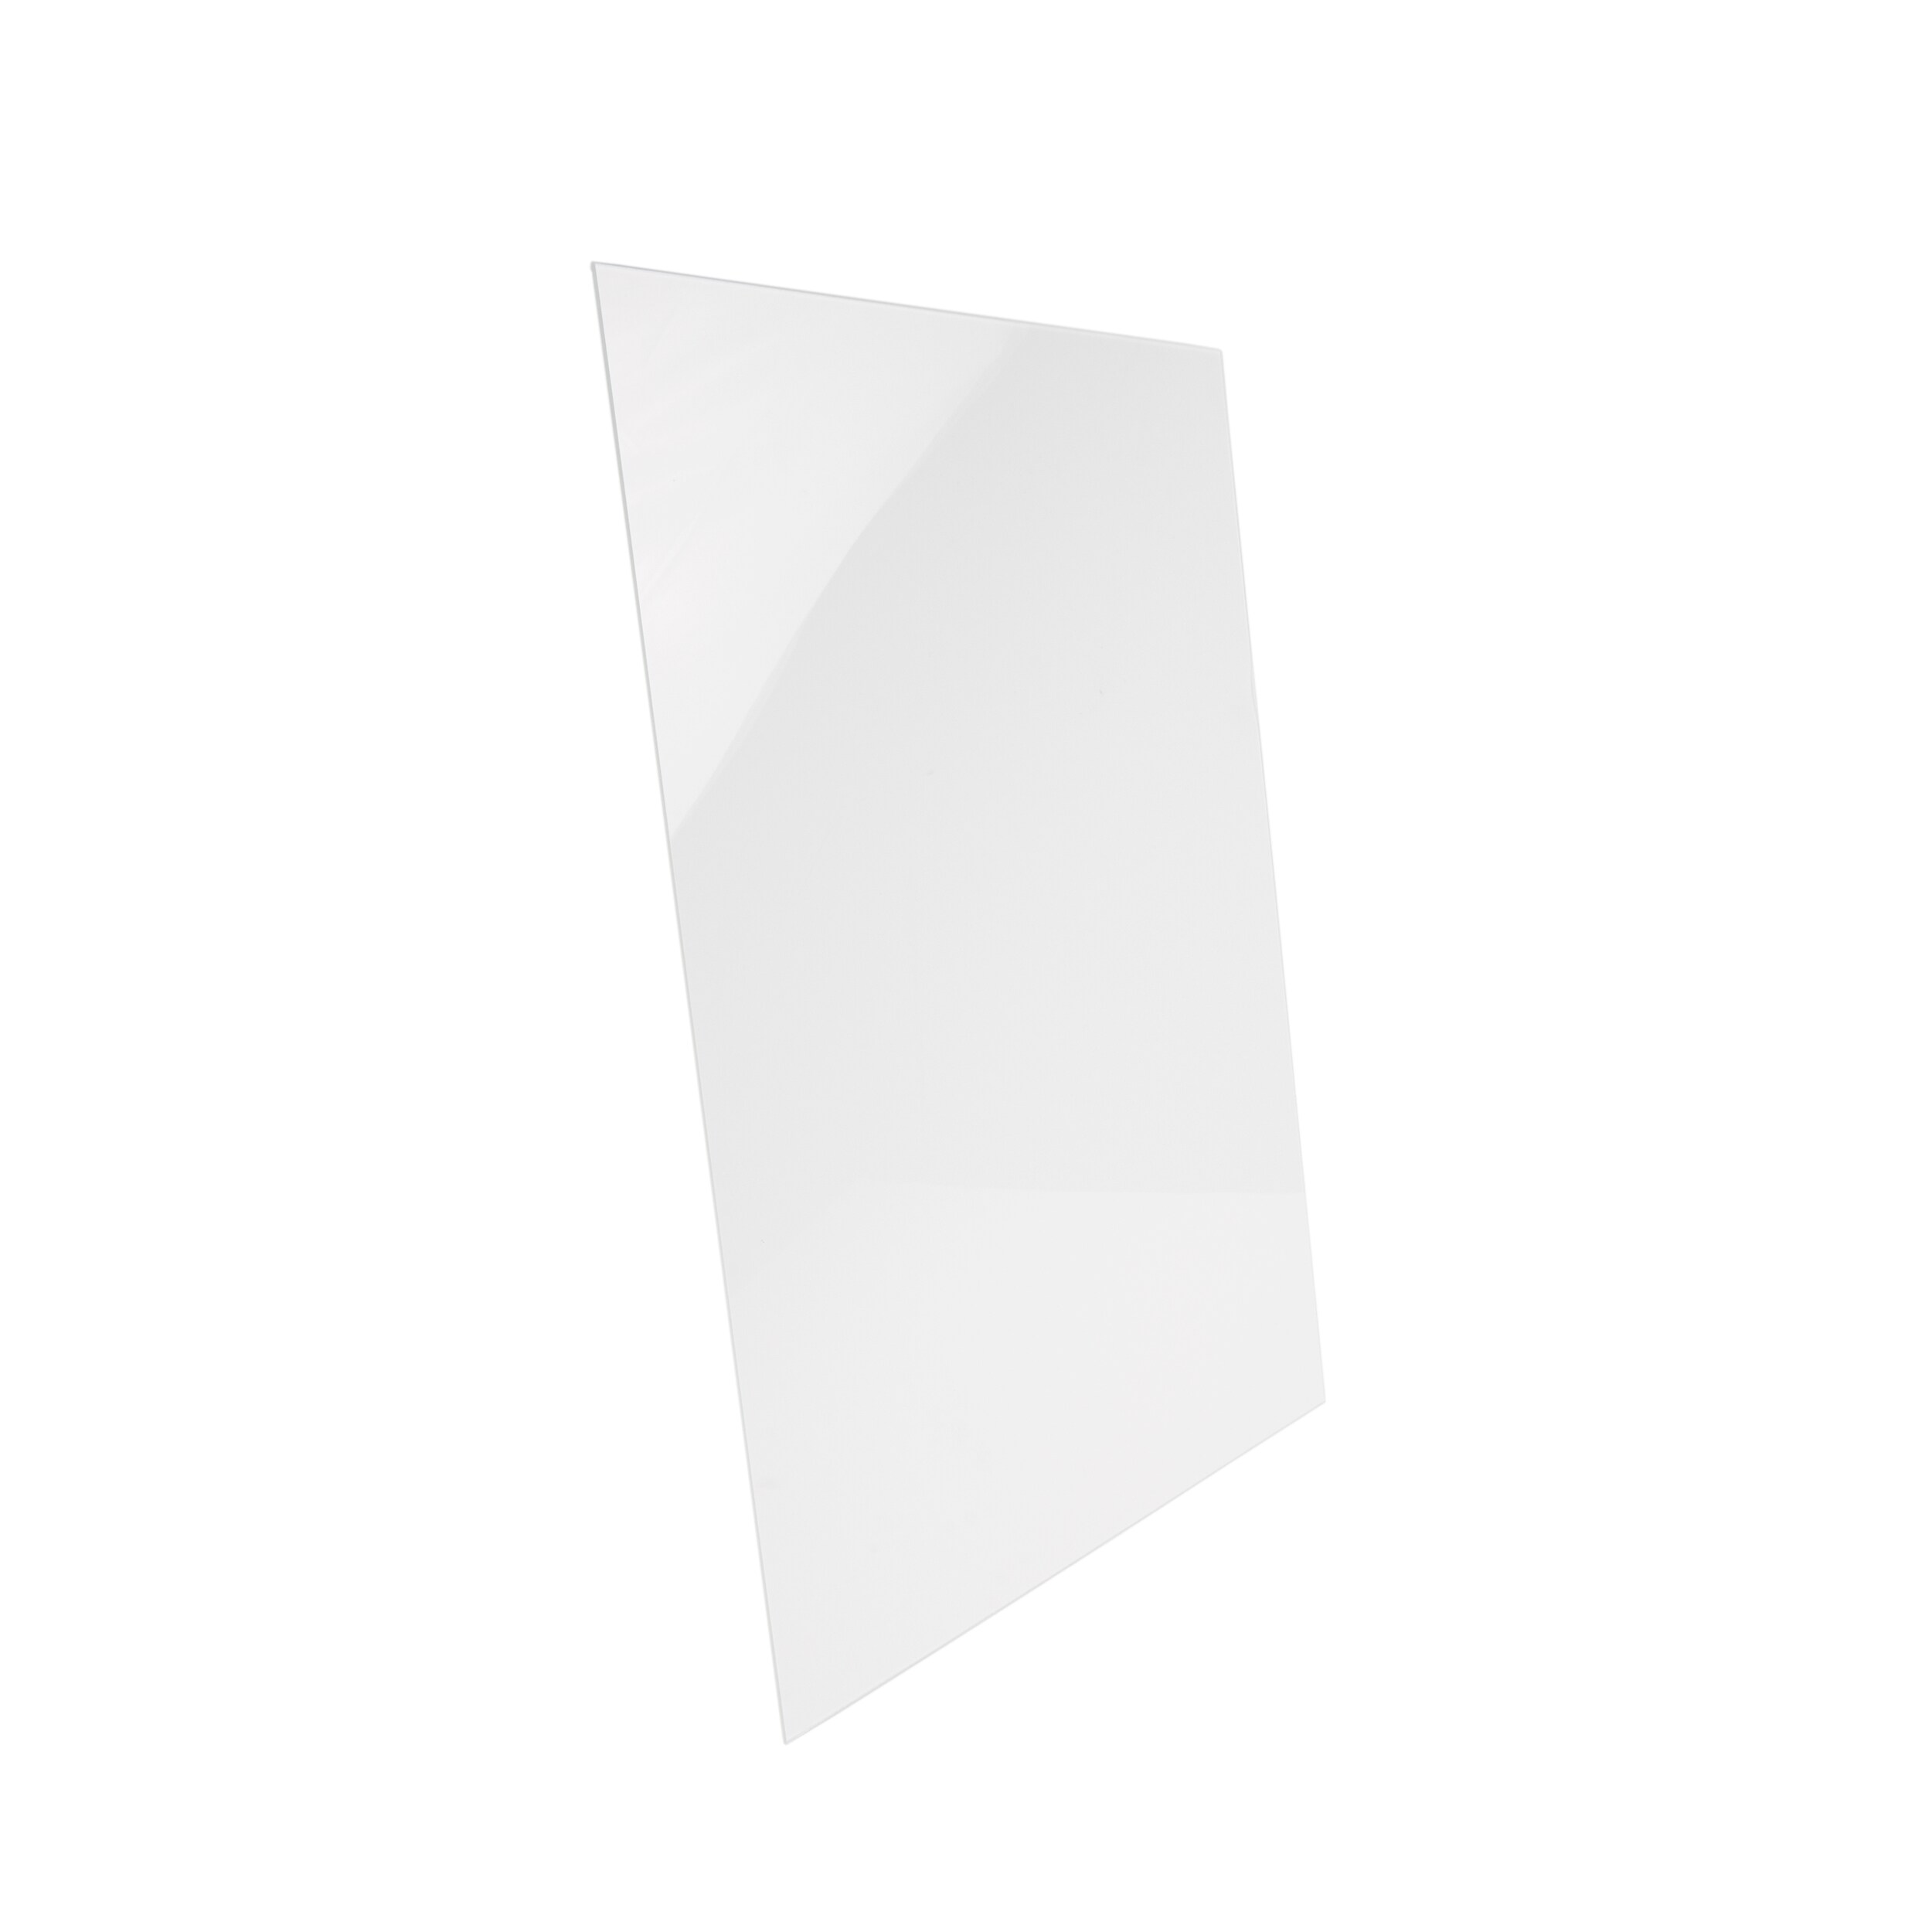 Clear Acrylic Craft Sheet by Make Market®